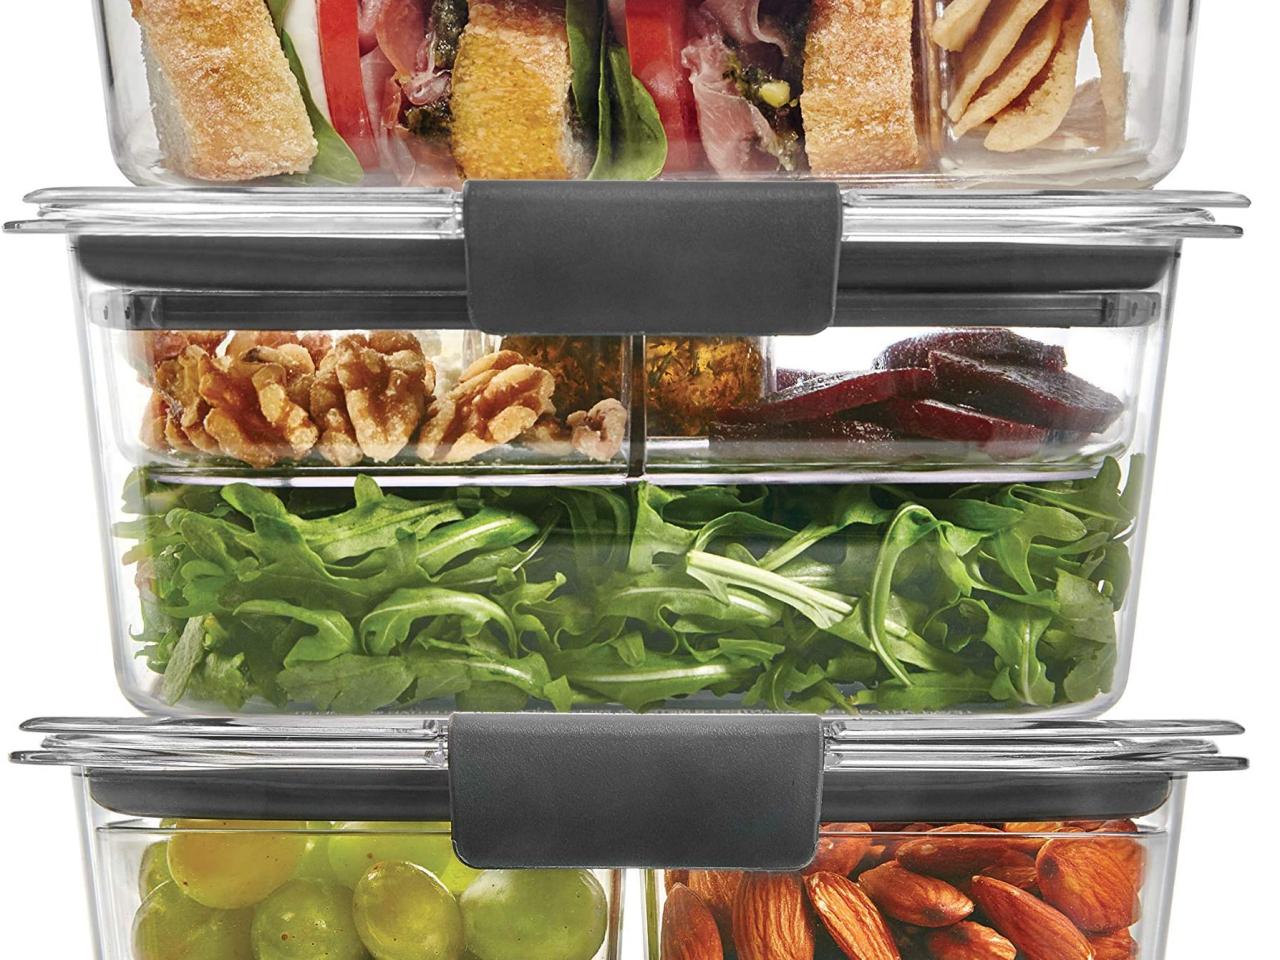 https://food.fnr.sndimg.com/content/dam/images/food/products/2023/3/27/rx_rubbermaid-12-piece-brilliance-food-storage.jpeg.rend.hgtvcom.1280.960.suffix/1679946890374.jpeg